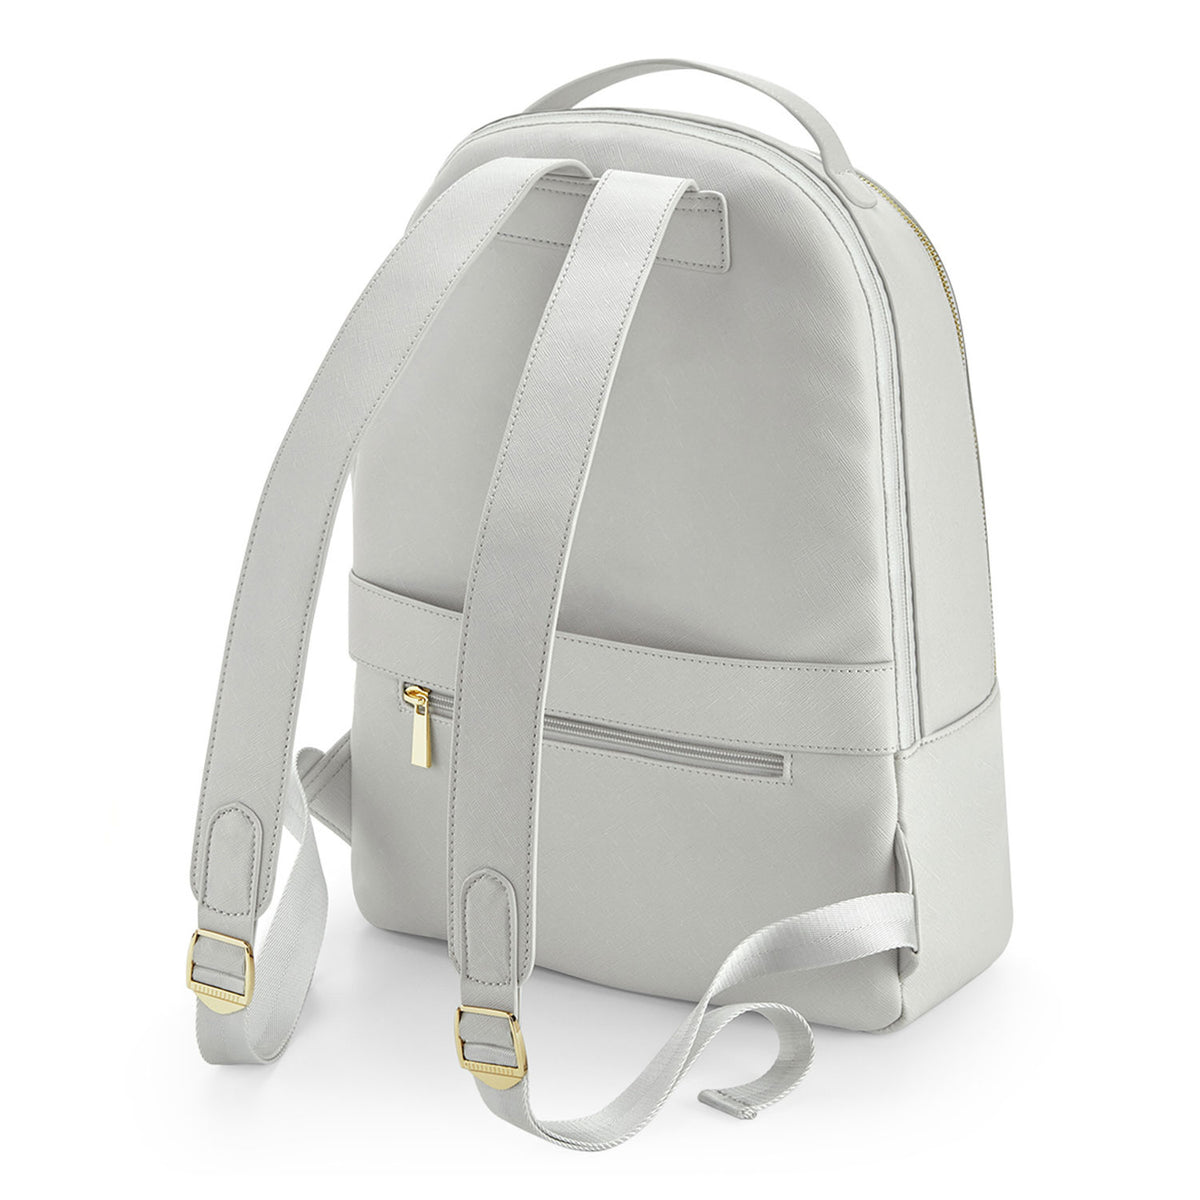 Saffiano Leather Boutique - Monogrammed Backpack